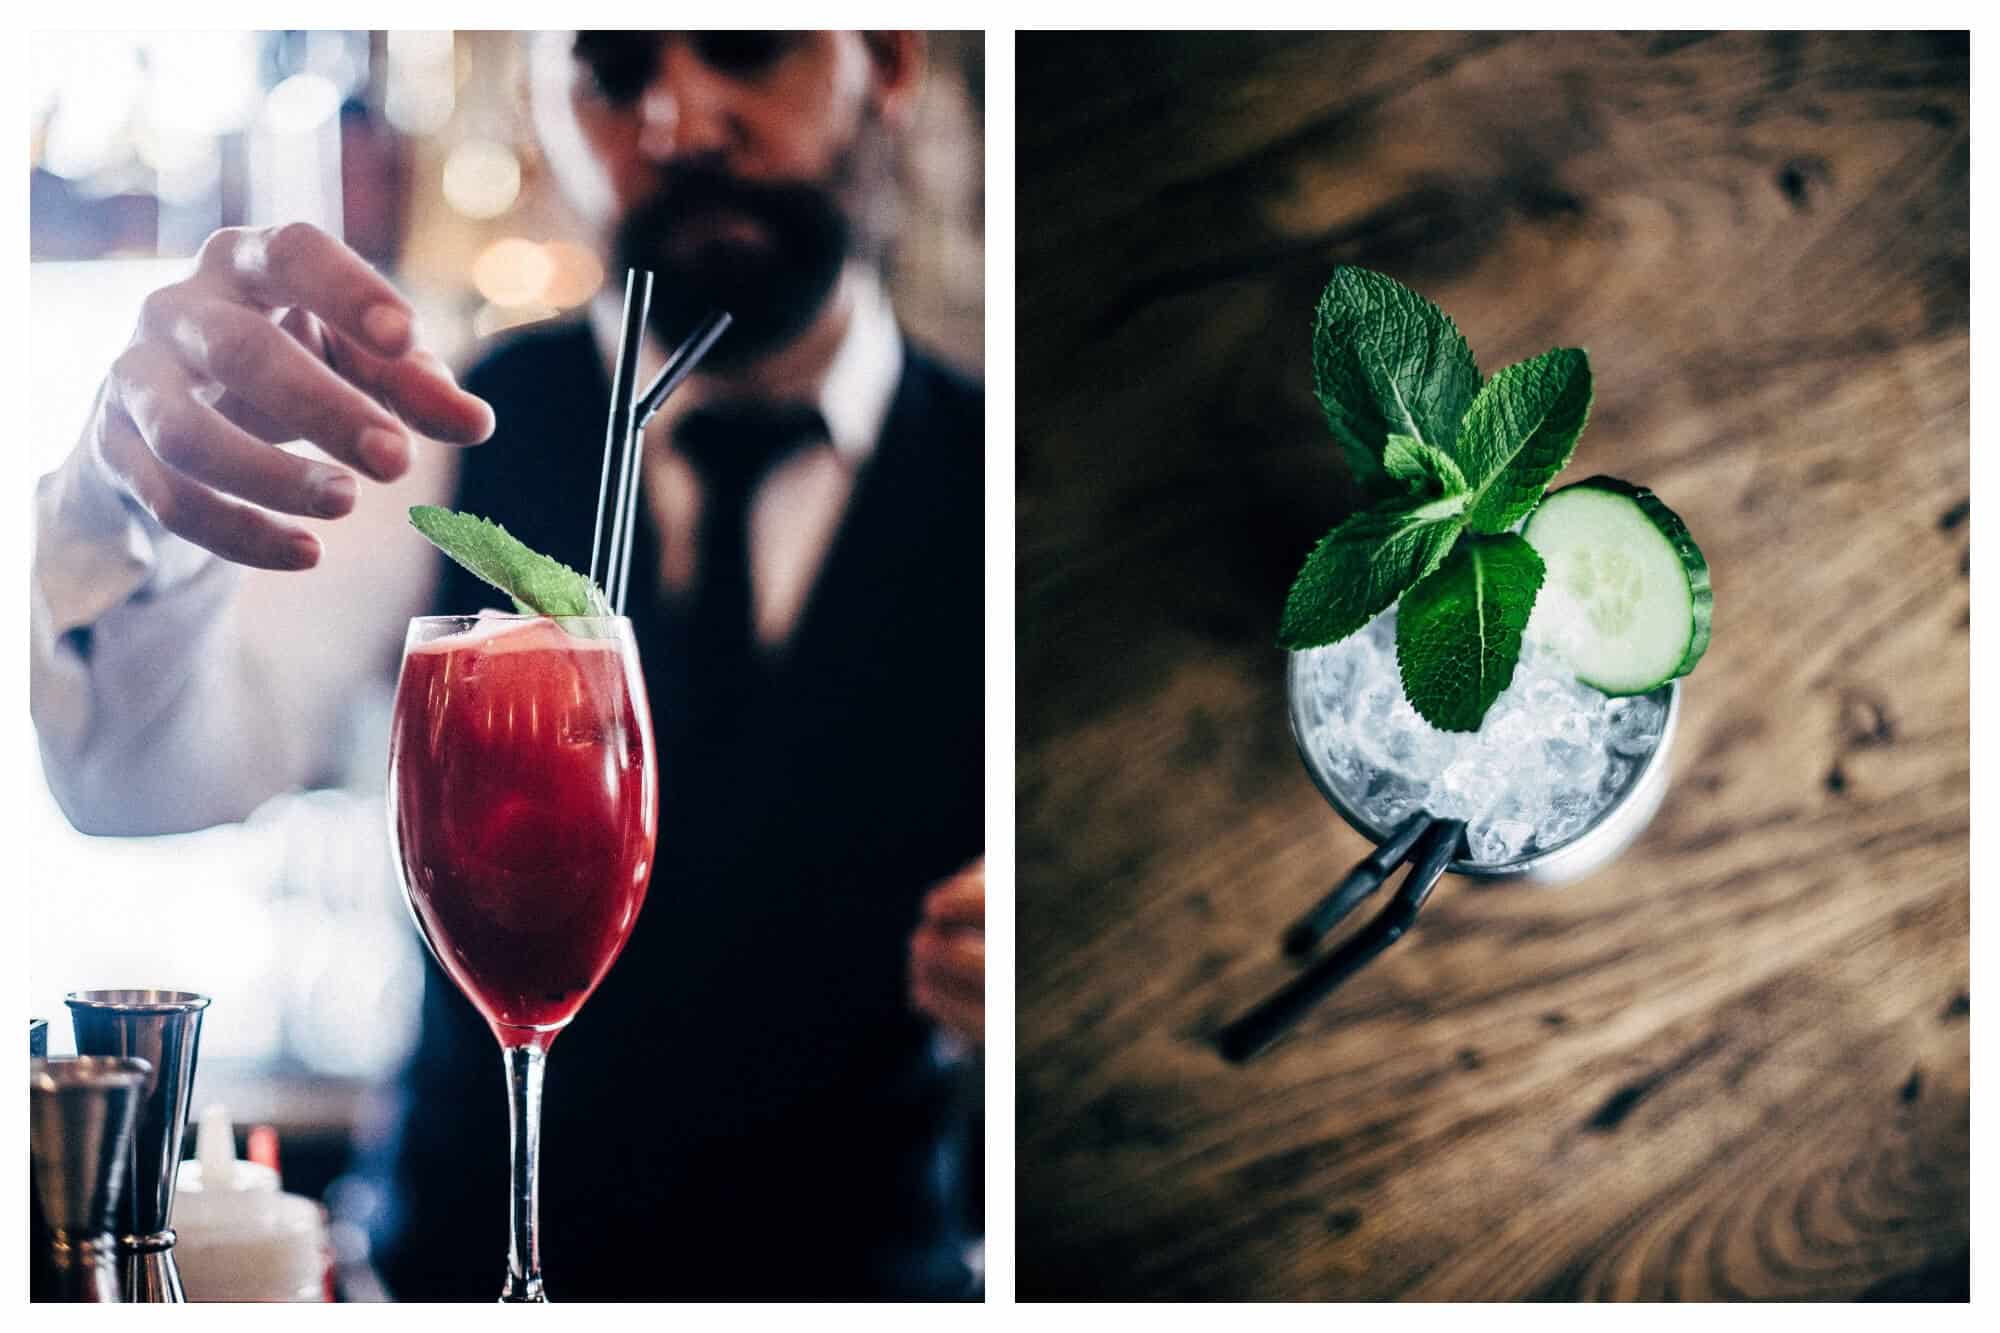 Left: A man preparing a red cocktail with a mint herb leaf, a straw, and a stirrer. Right: View of a cocktail with mint leaves and a cucumber on a table from above.